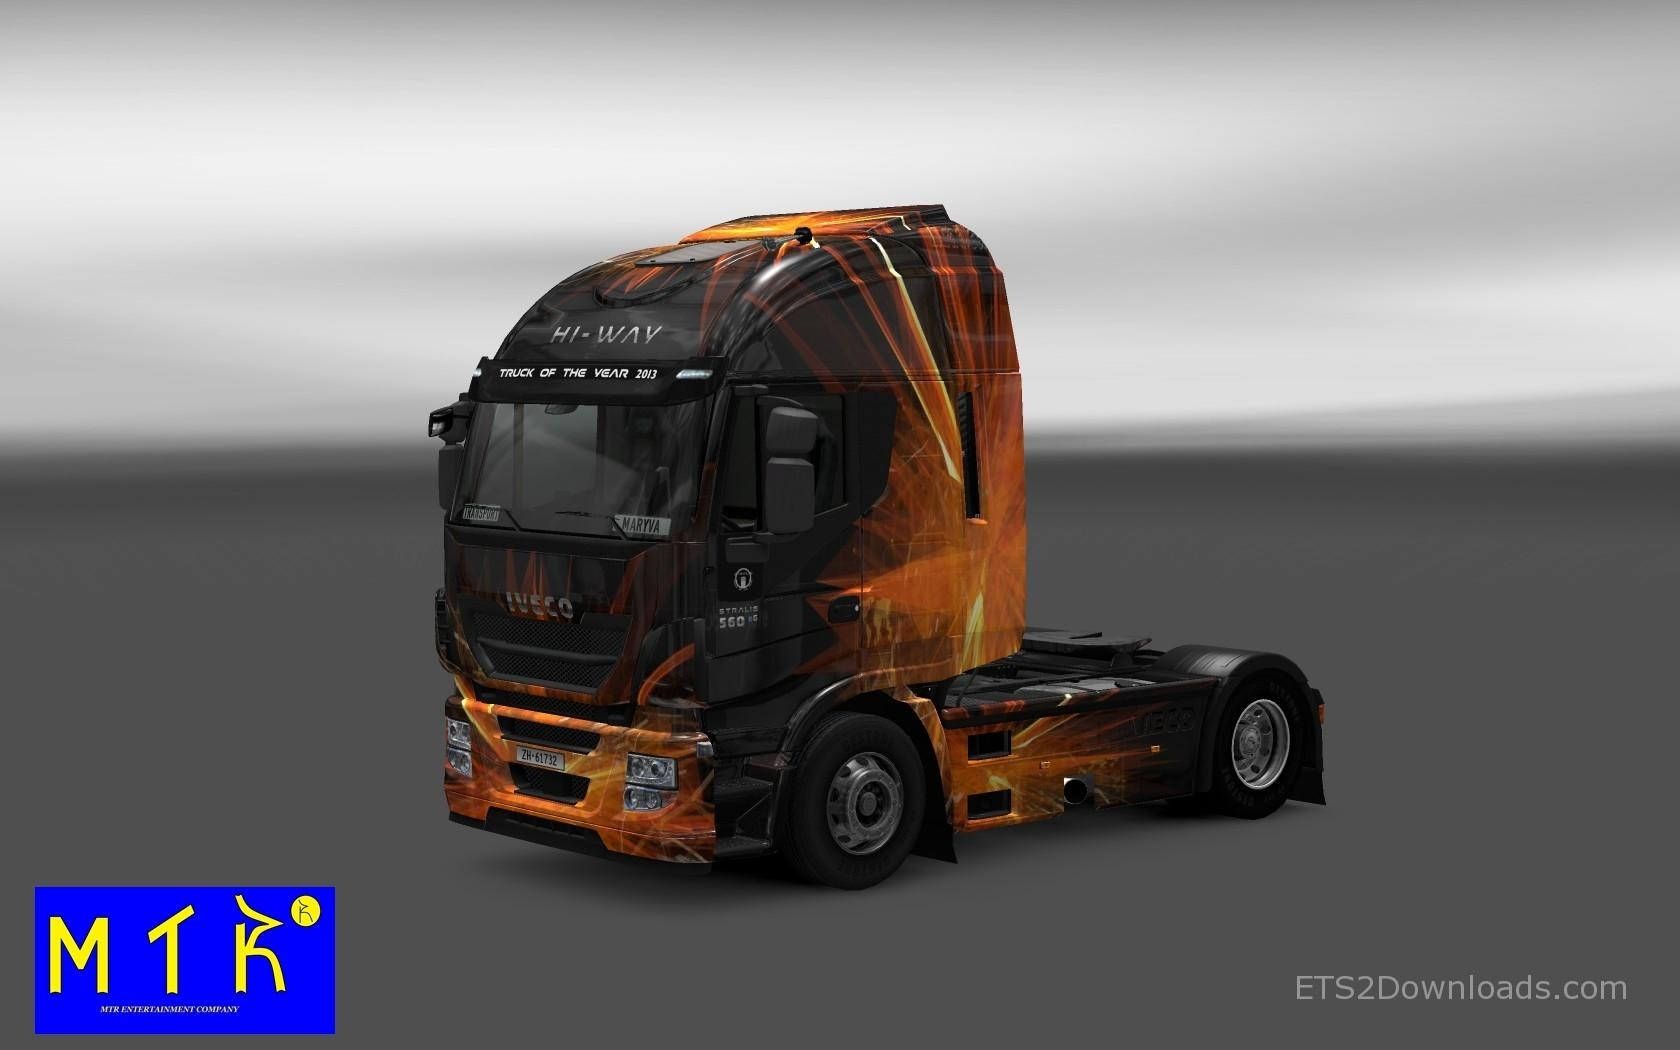 Cubical Flare Skin for Iveco Hi Way